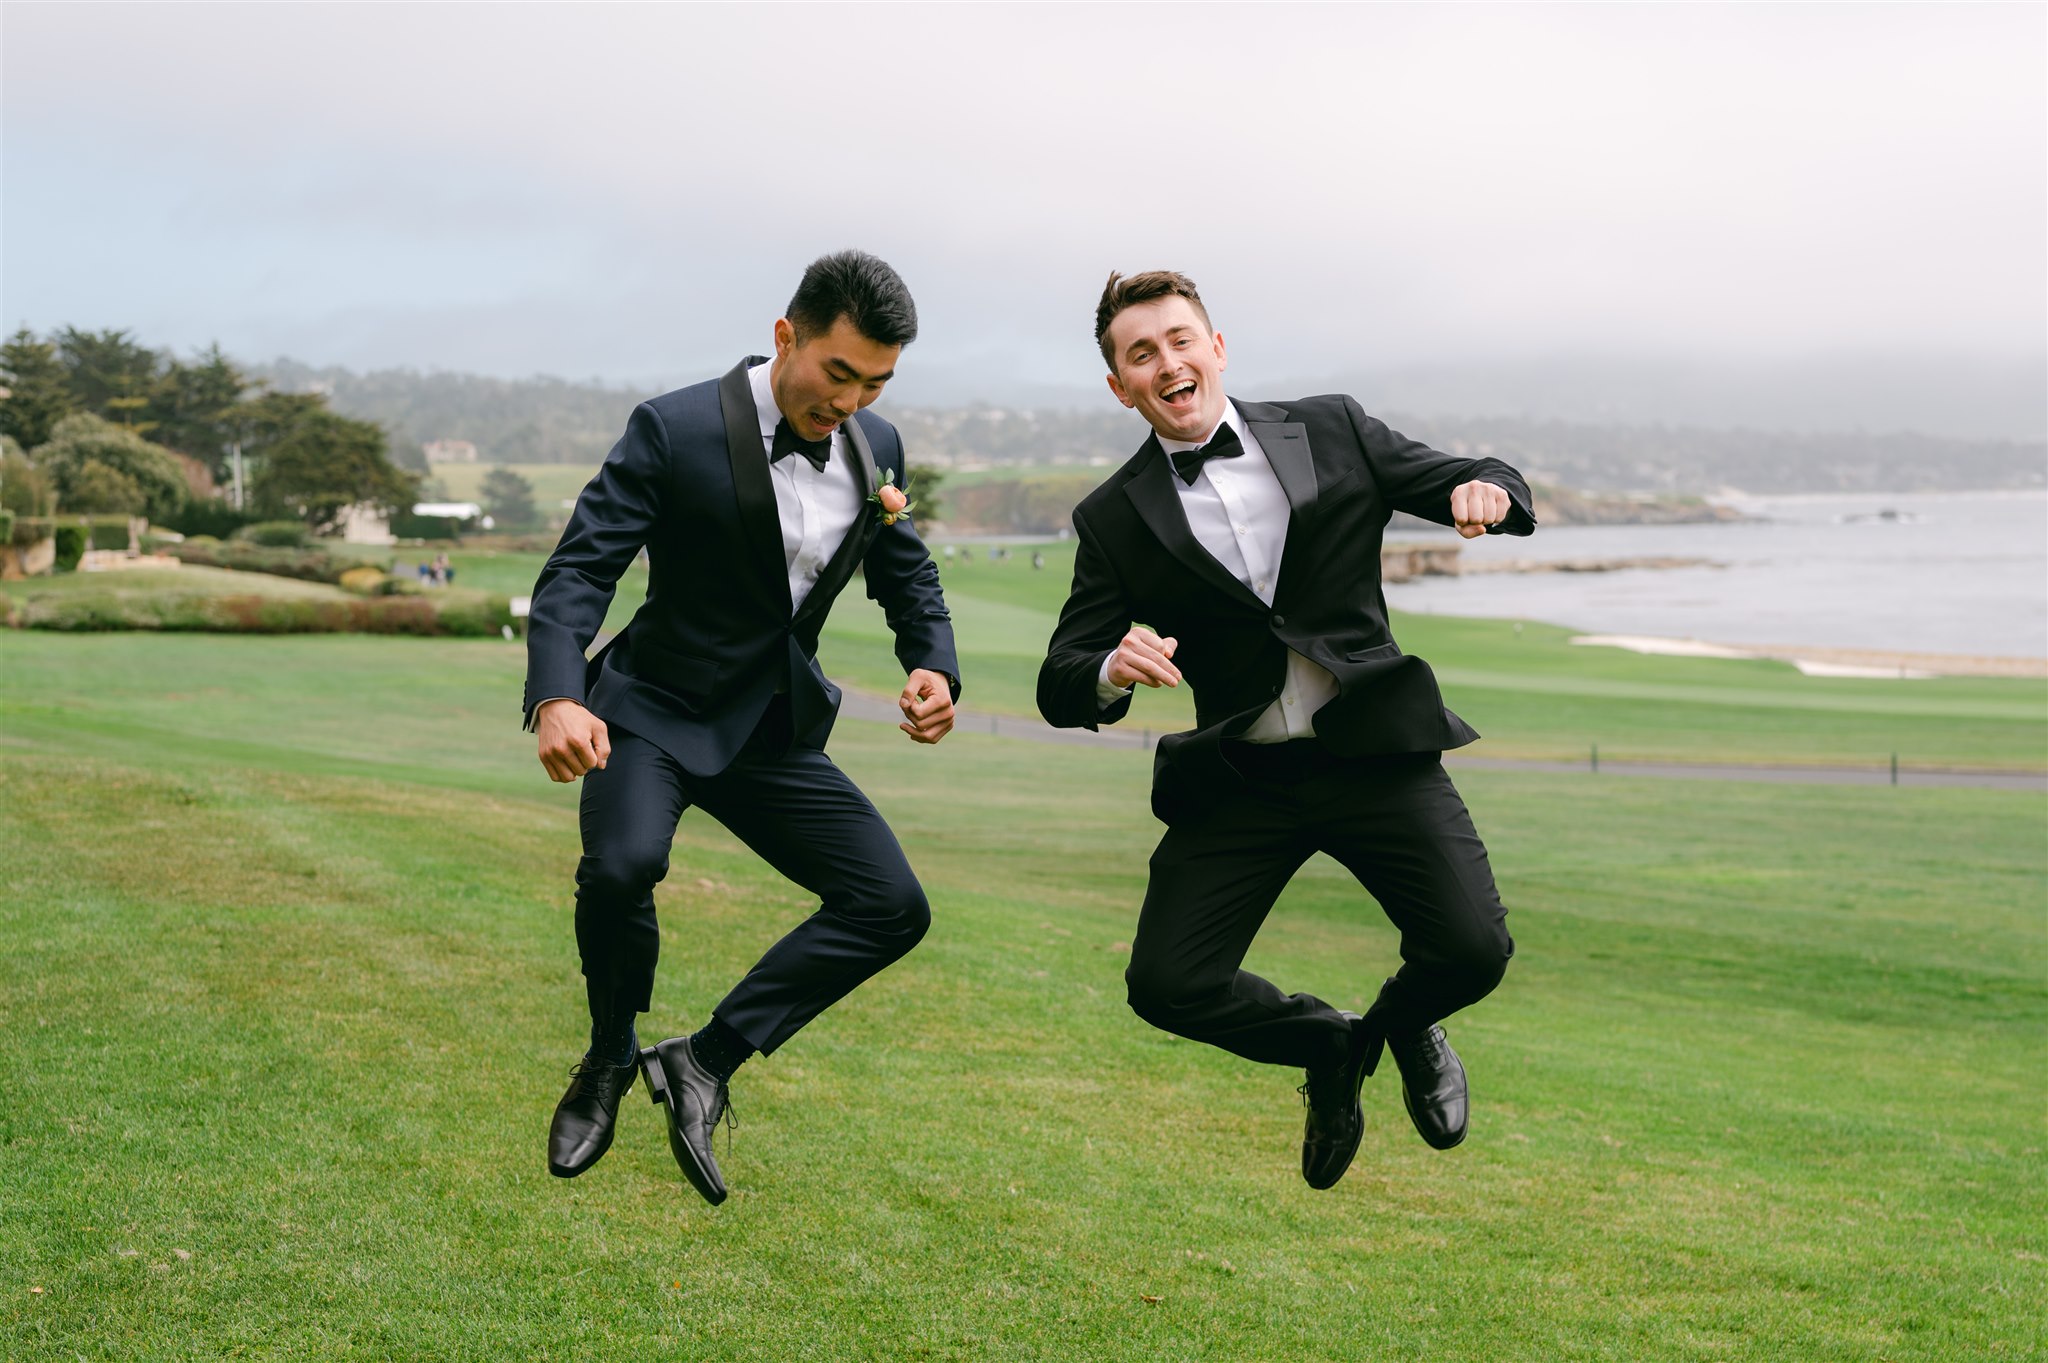 groom and groomsman best man jumping photo heels clicking navy blue suit with black details beach in back beachside wedding